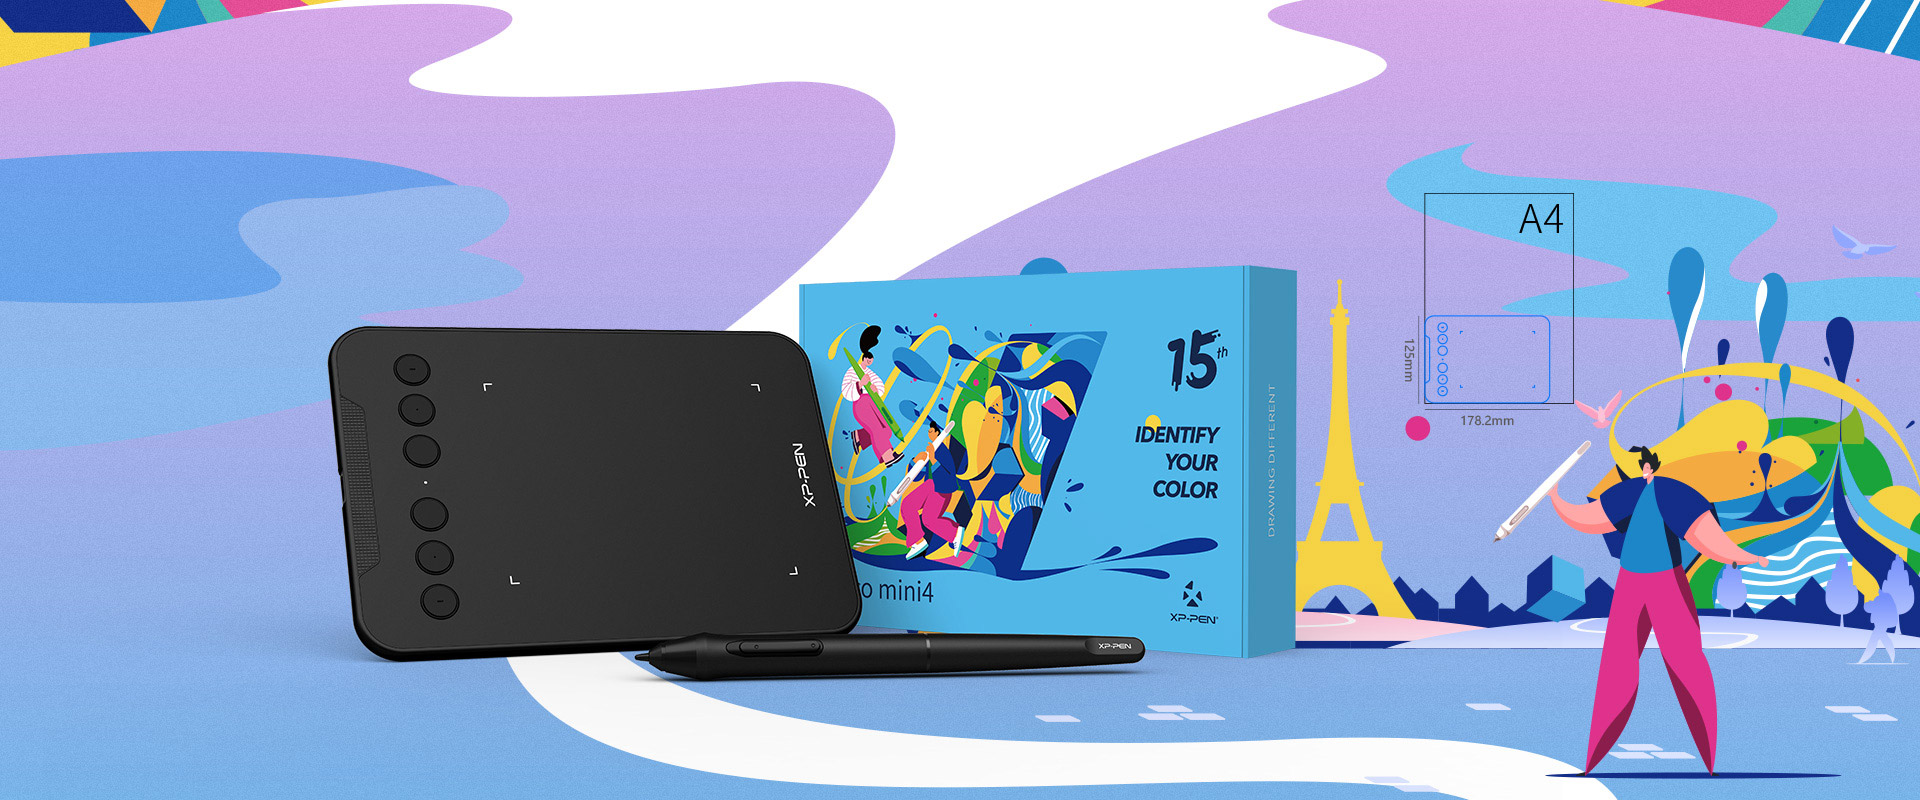 Realize your vision with XP-Pen Deco mini4 portablet drawing tablet Anniversary Edition